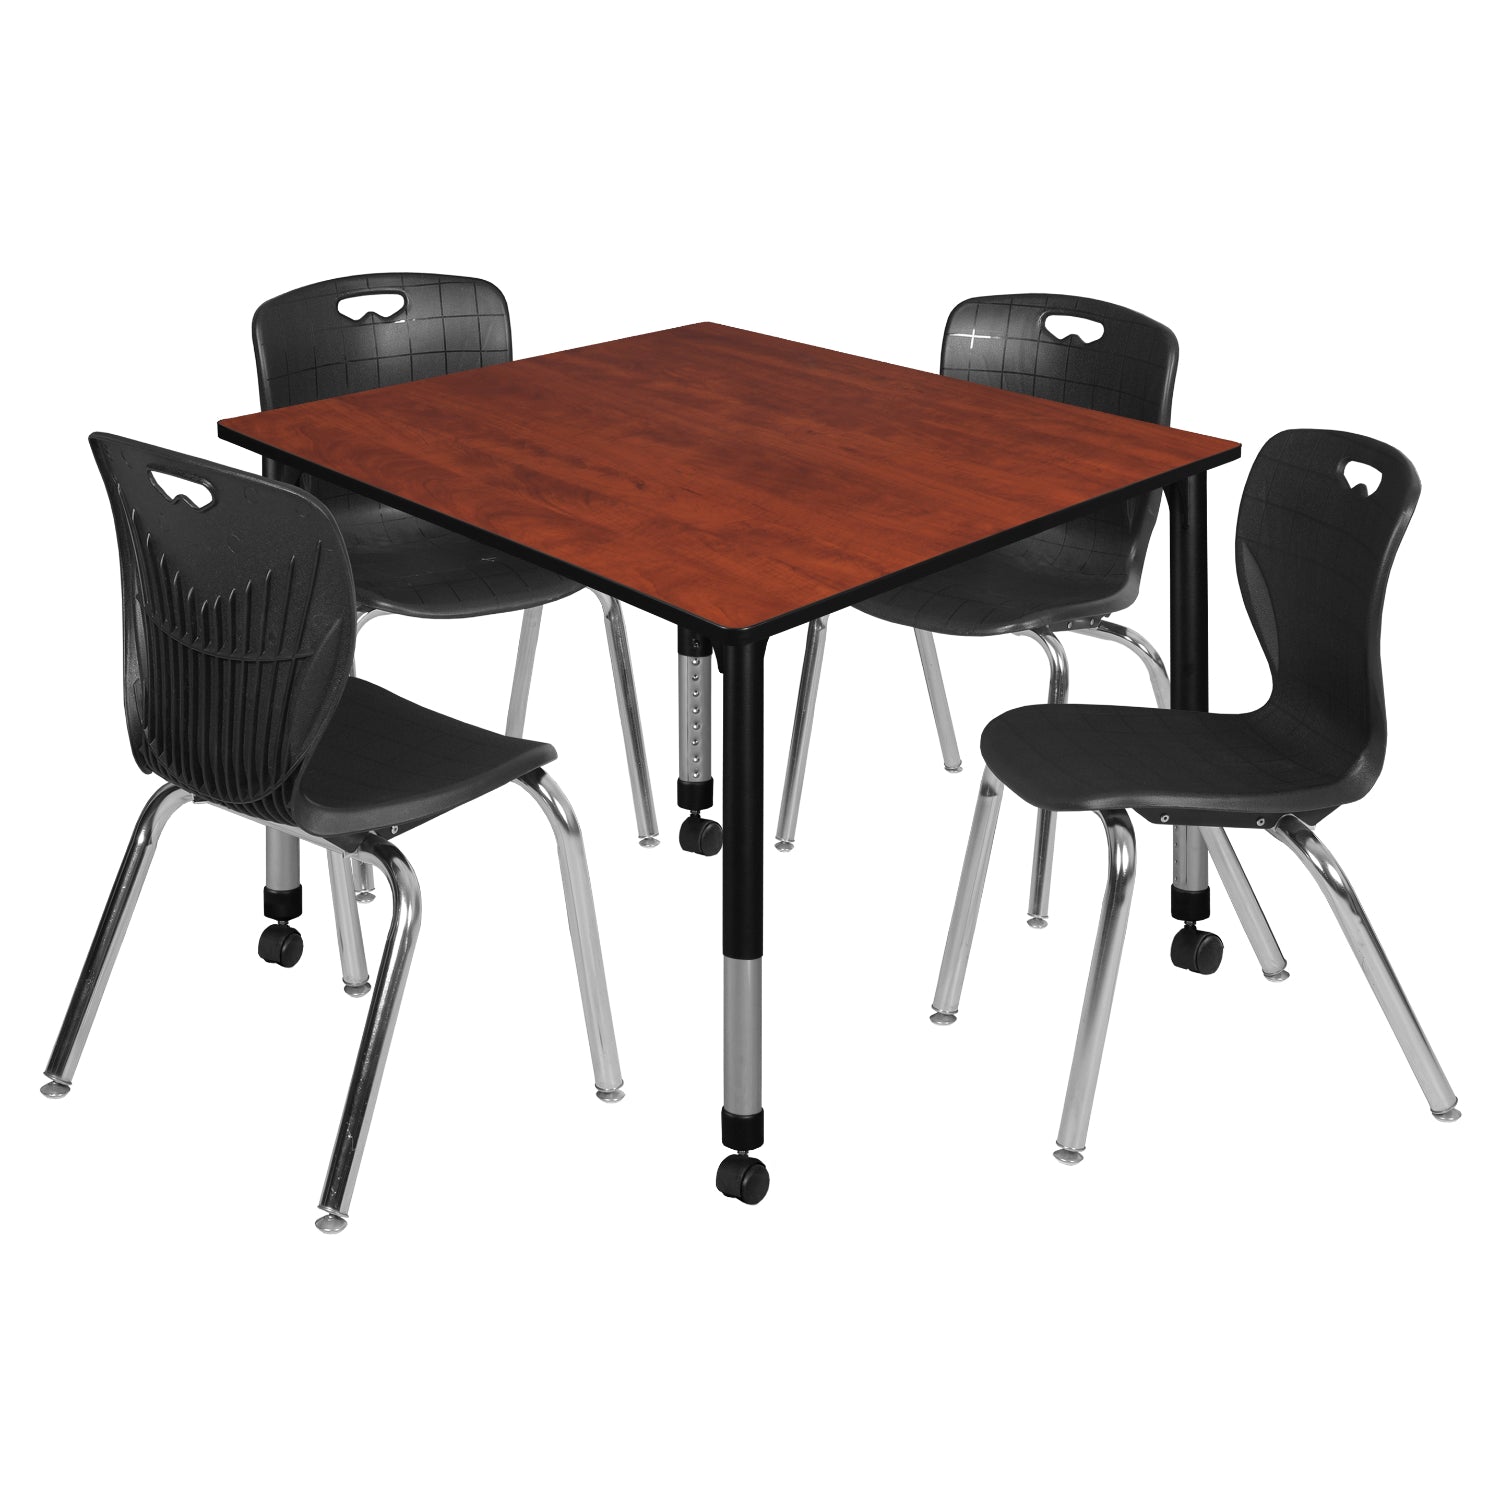 Kee Classroom Table and Chair Package, Kee 48" Square Mobile Adjustable Height Table with 4 Andy 18" Stack Chairs